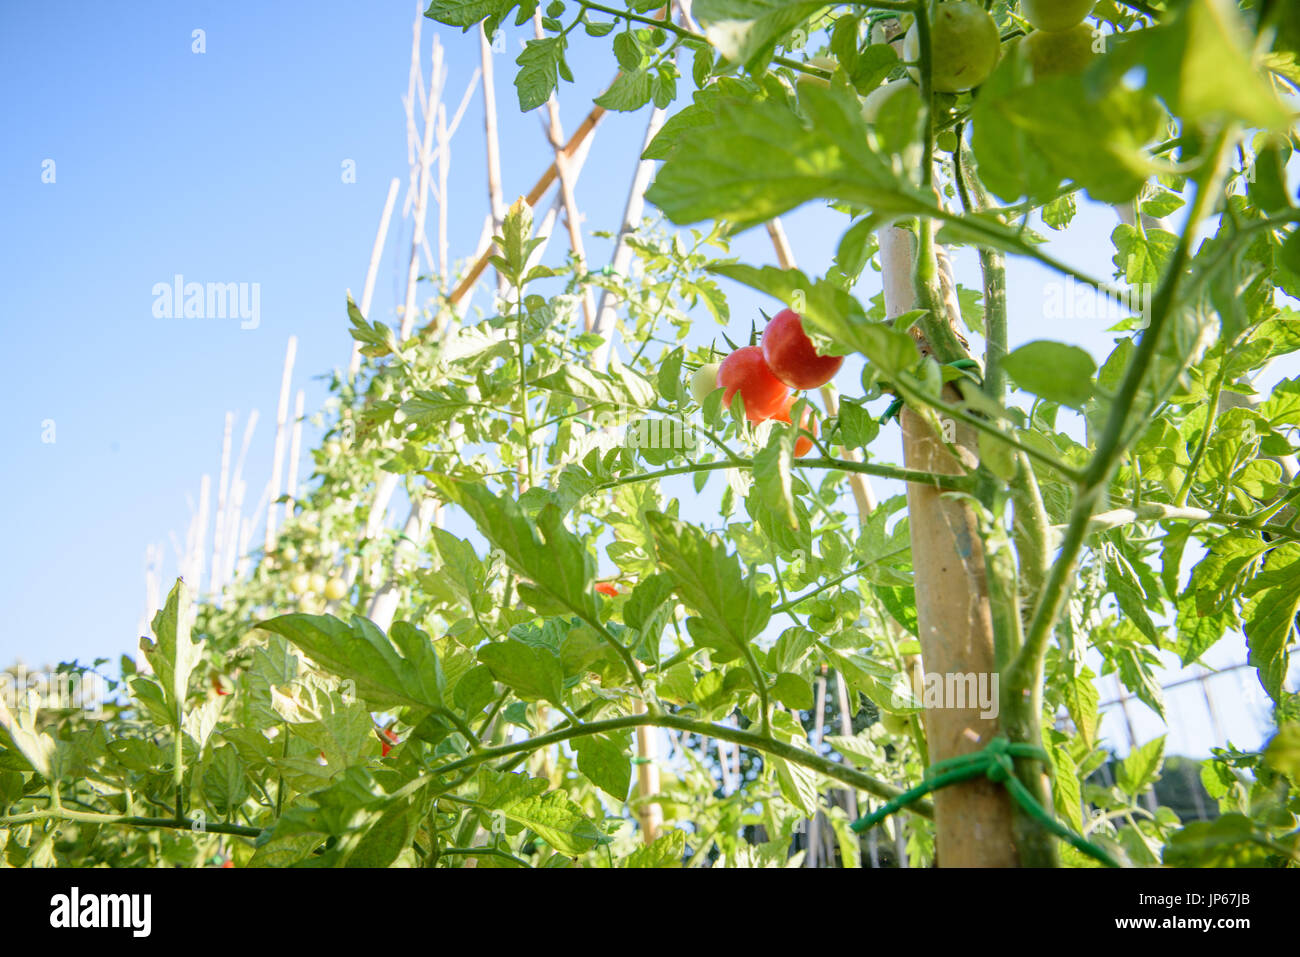 Low angle view of cherry tomato plant and red fruits in vegetable garden, blue sky in background Stock Photo